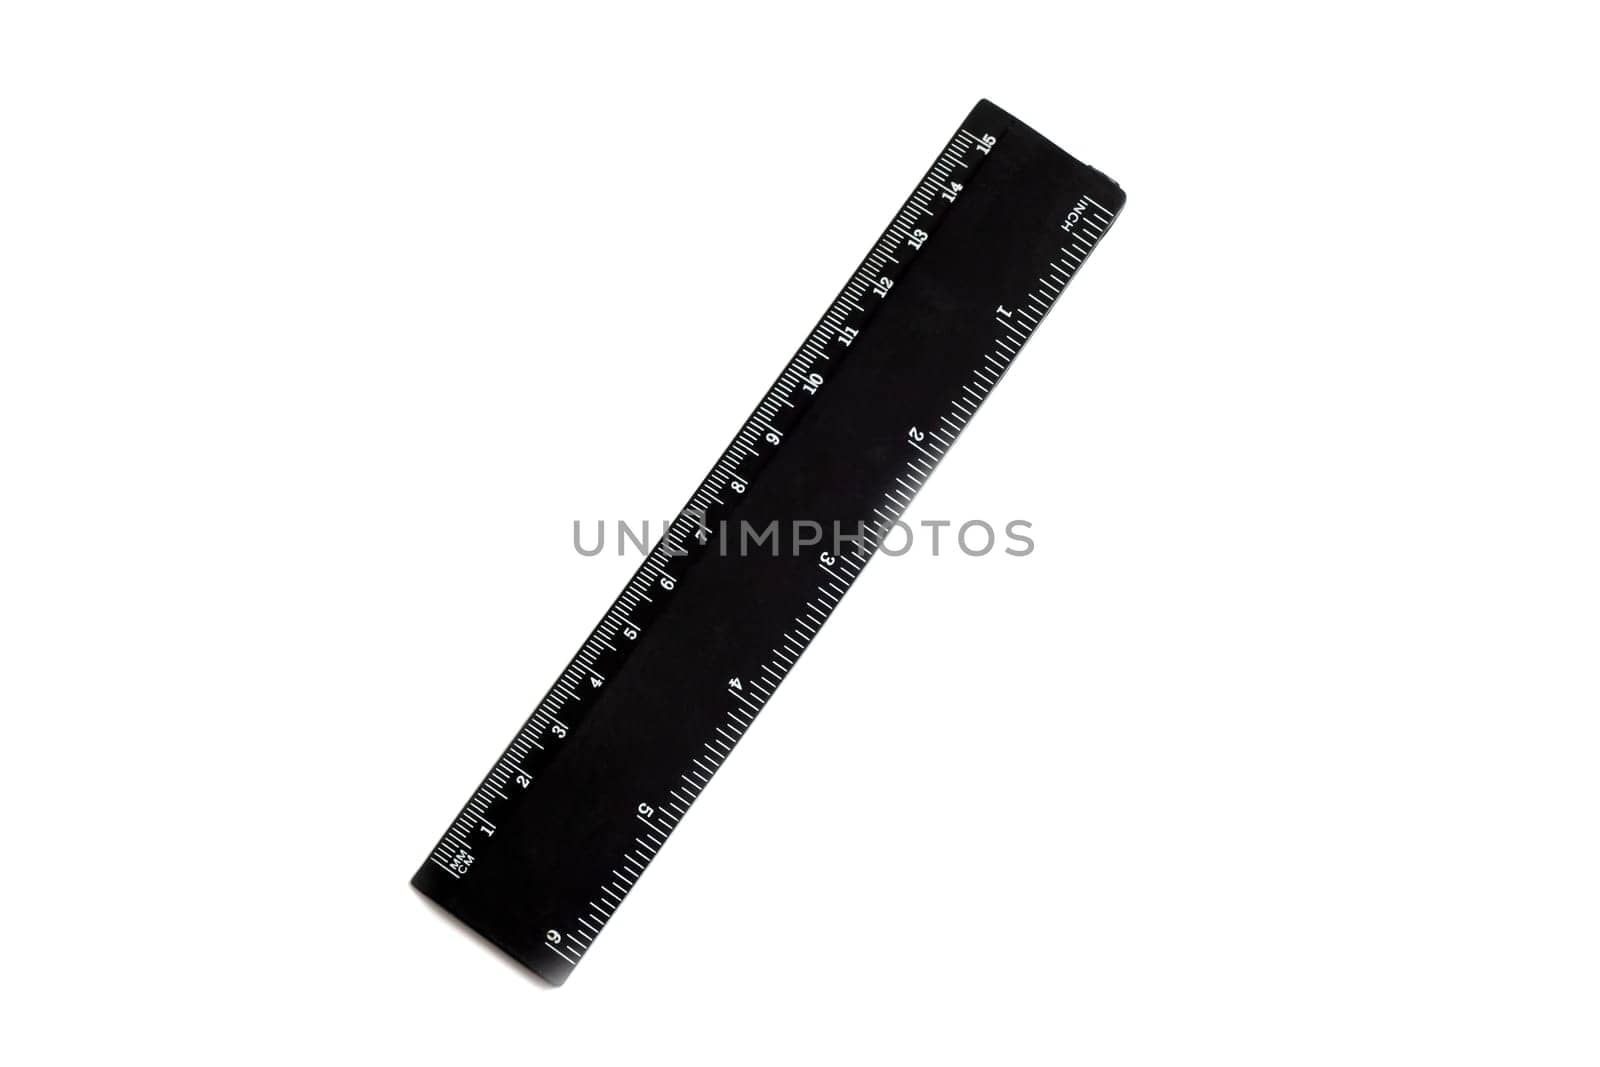 The Black ruler close up, isolate on a white background